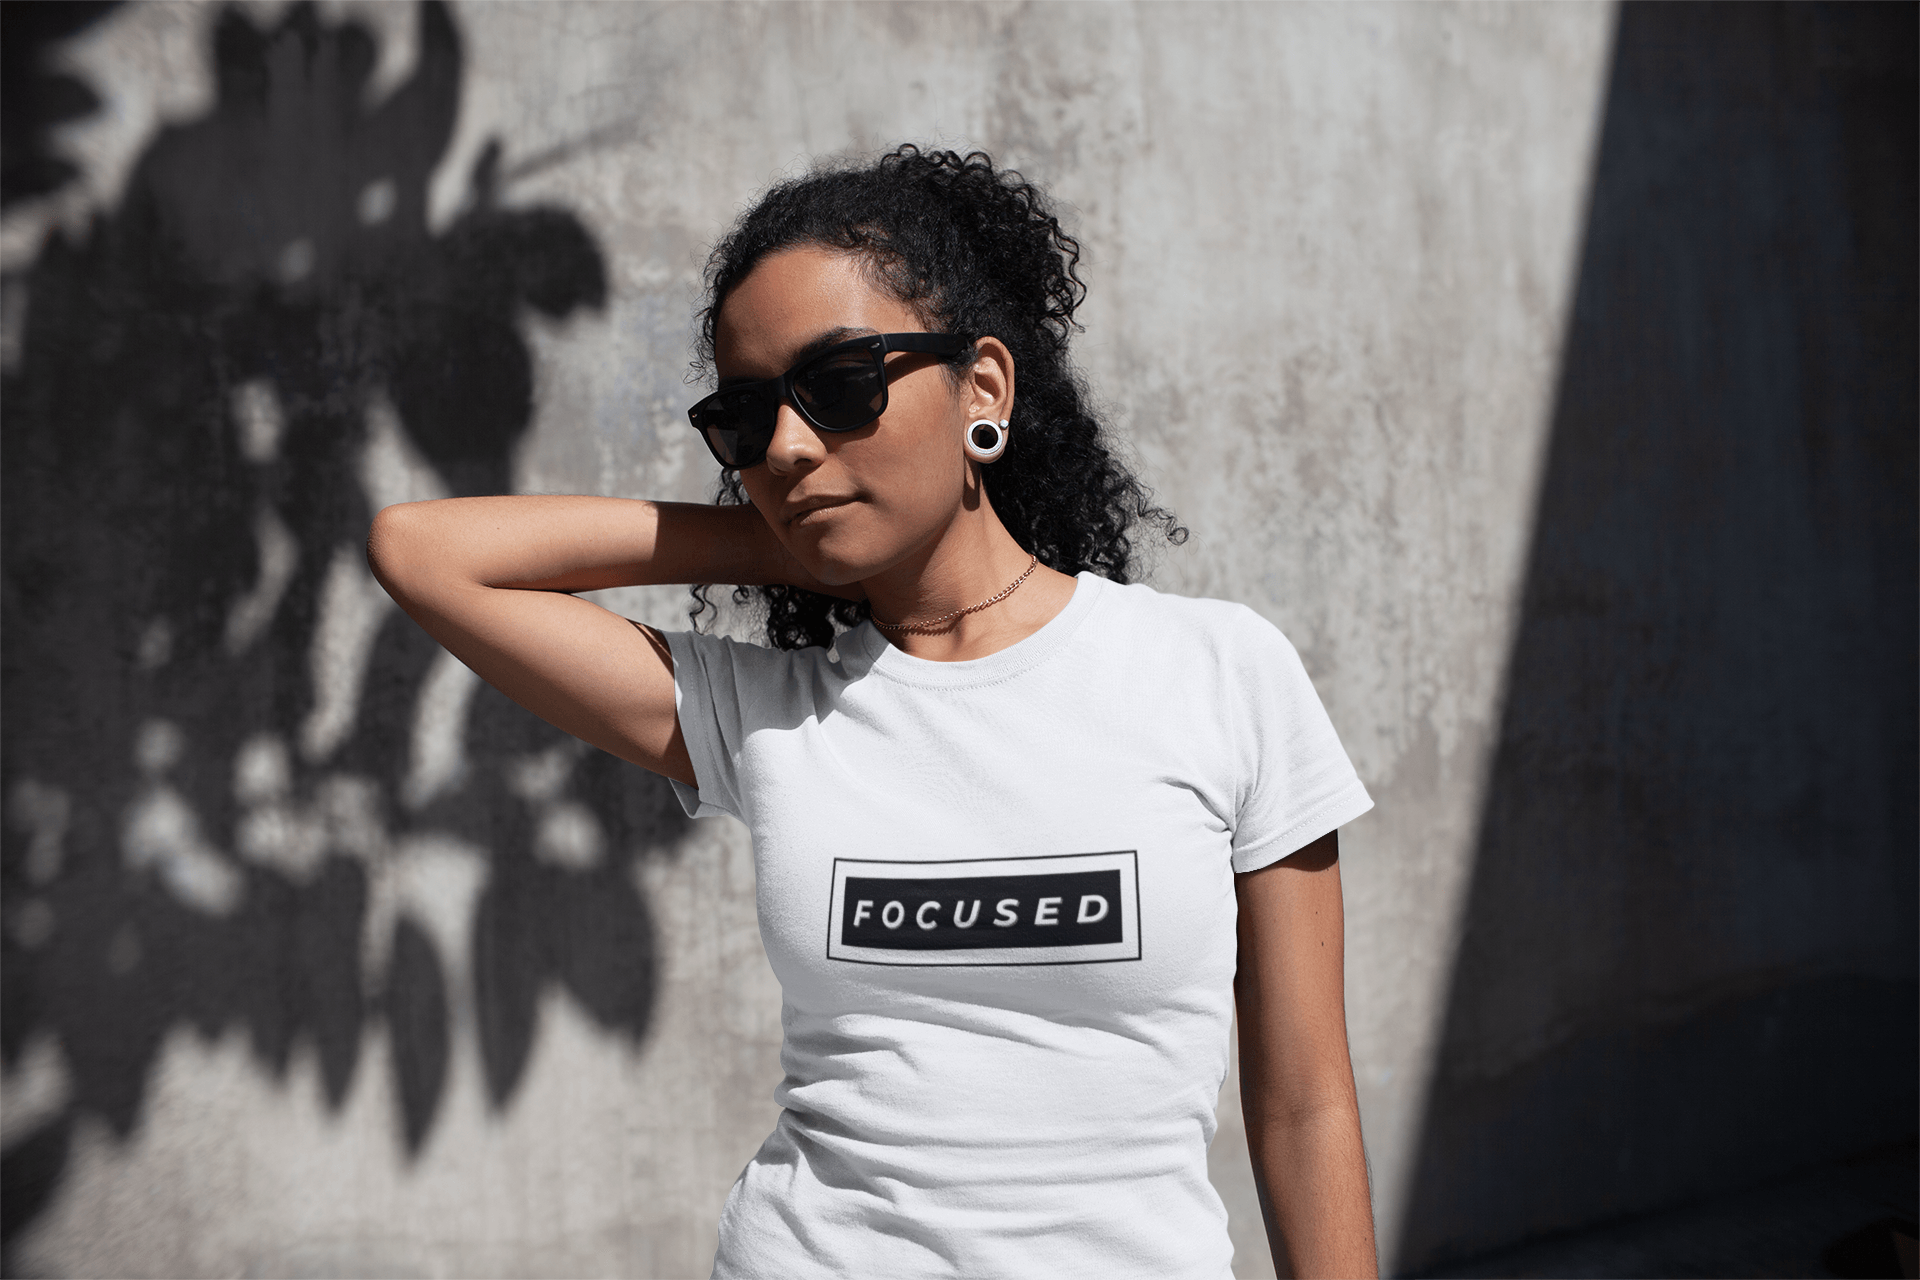 FOCUSED T-shirt - Women Empowerment T-Shirts & Apparel | CP Designs Unlimited